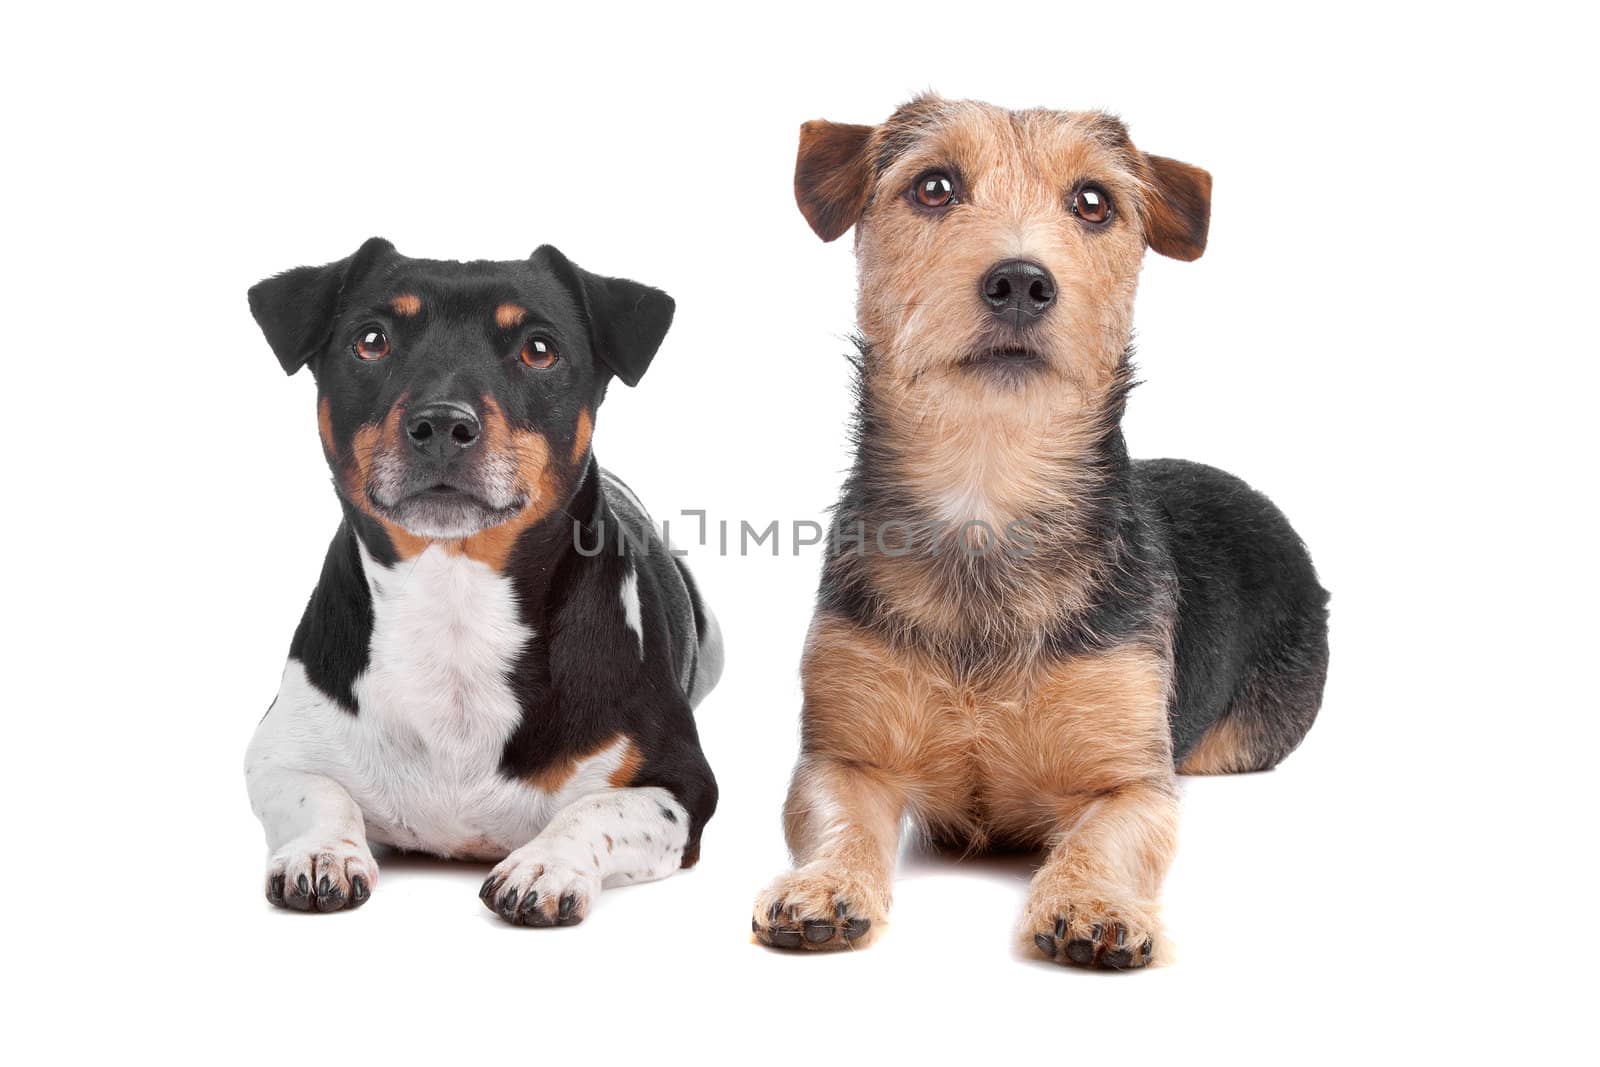 Jack Russel Terrier and mixed breed dog by eriklam